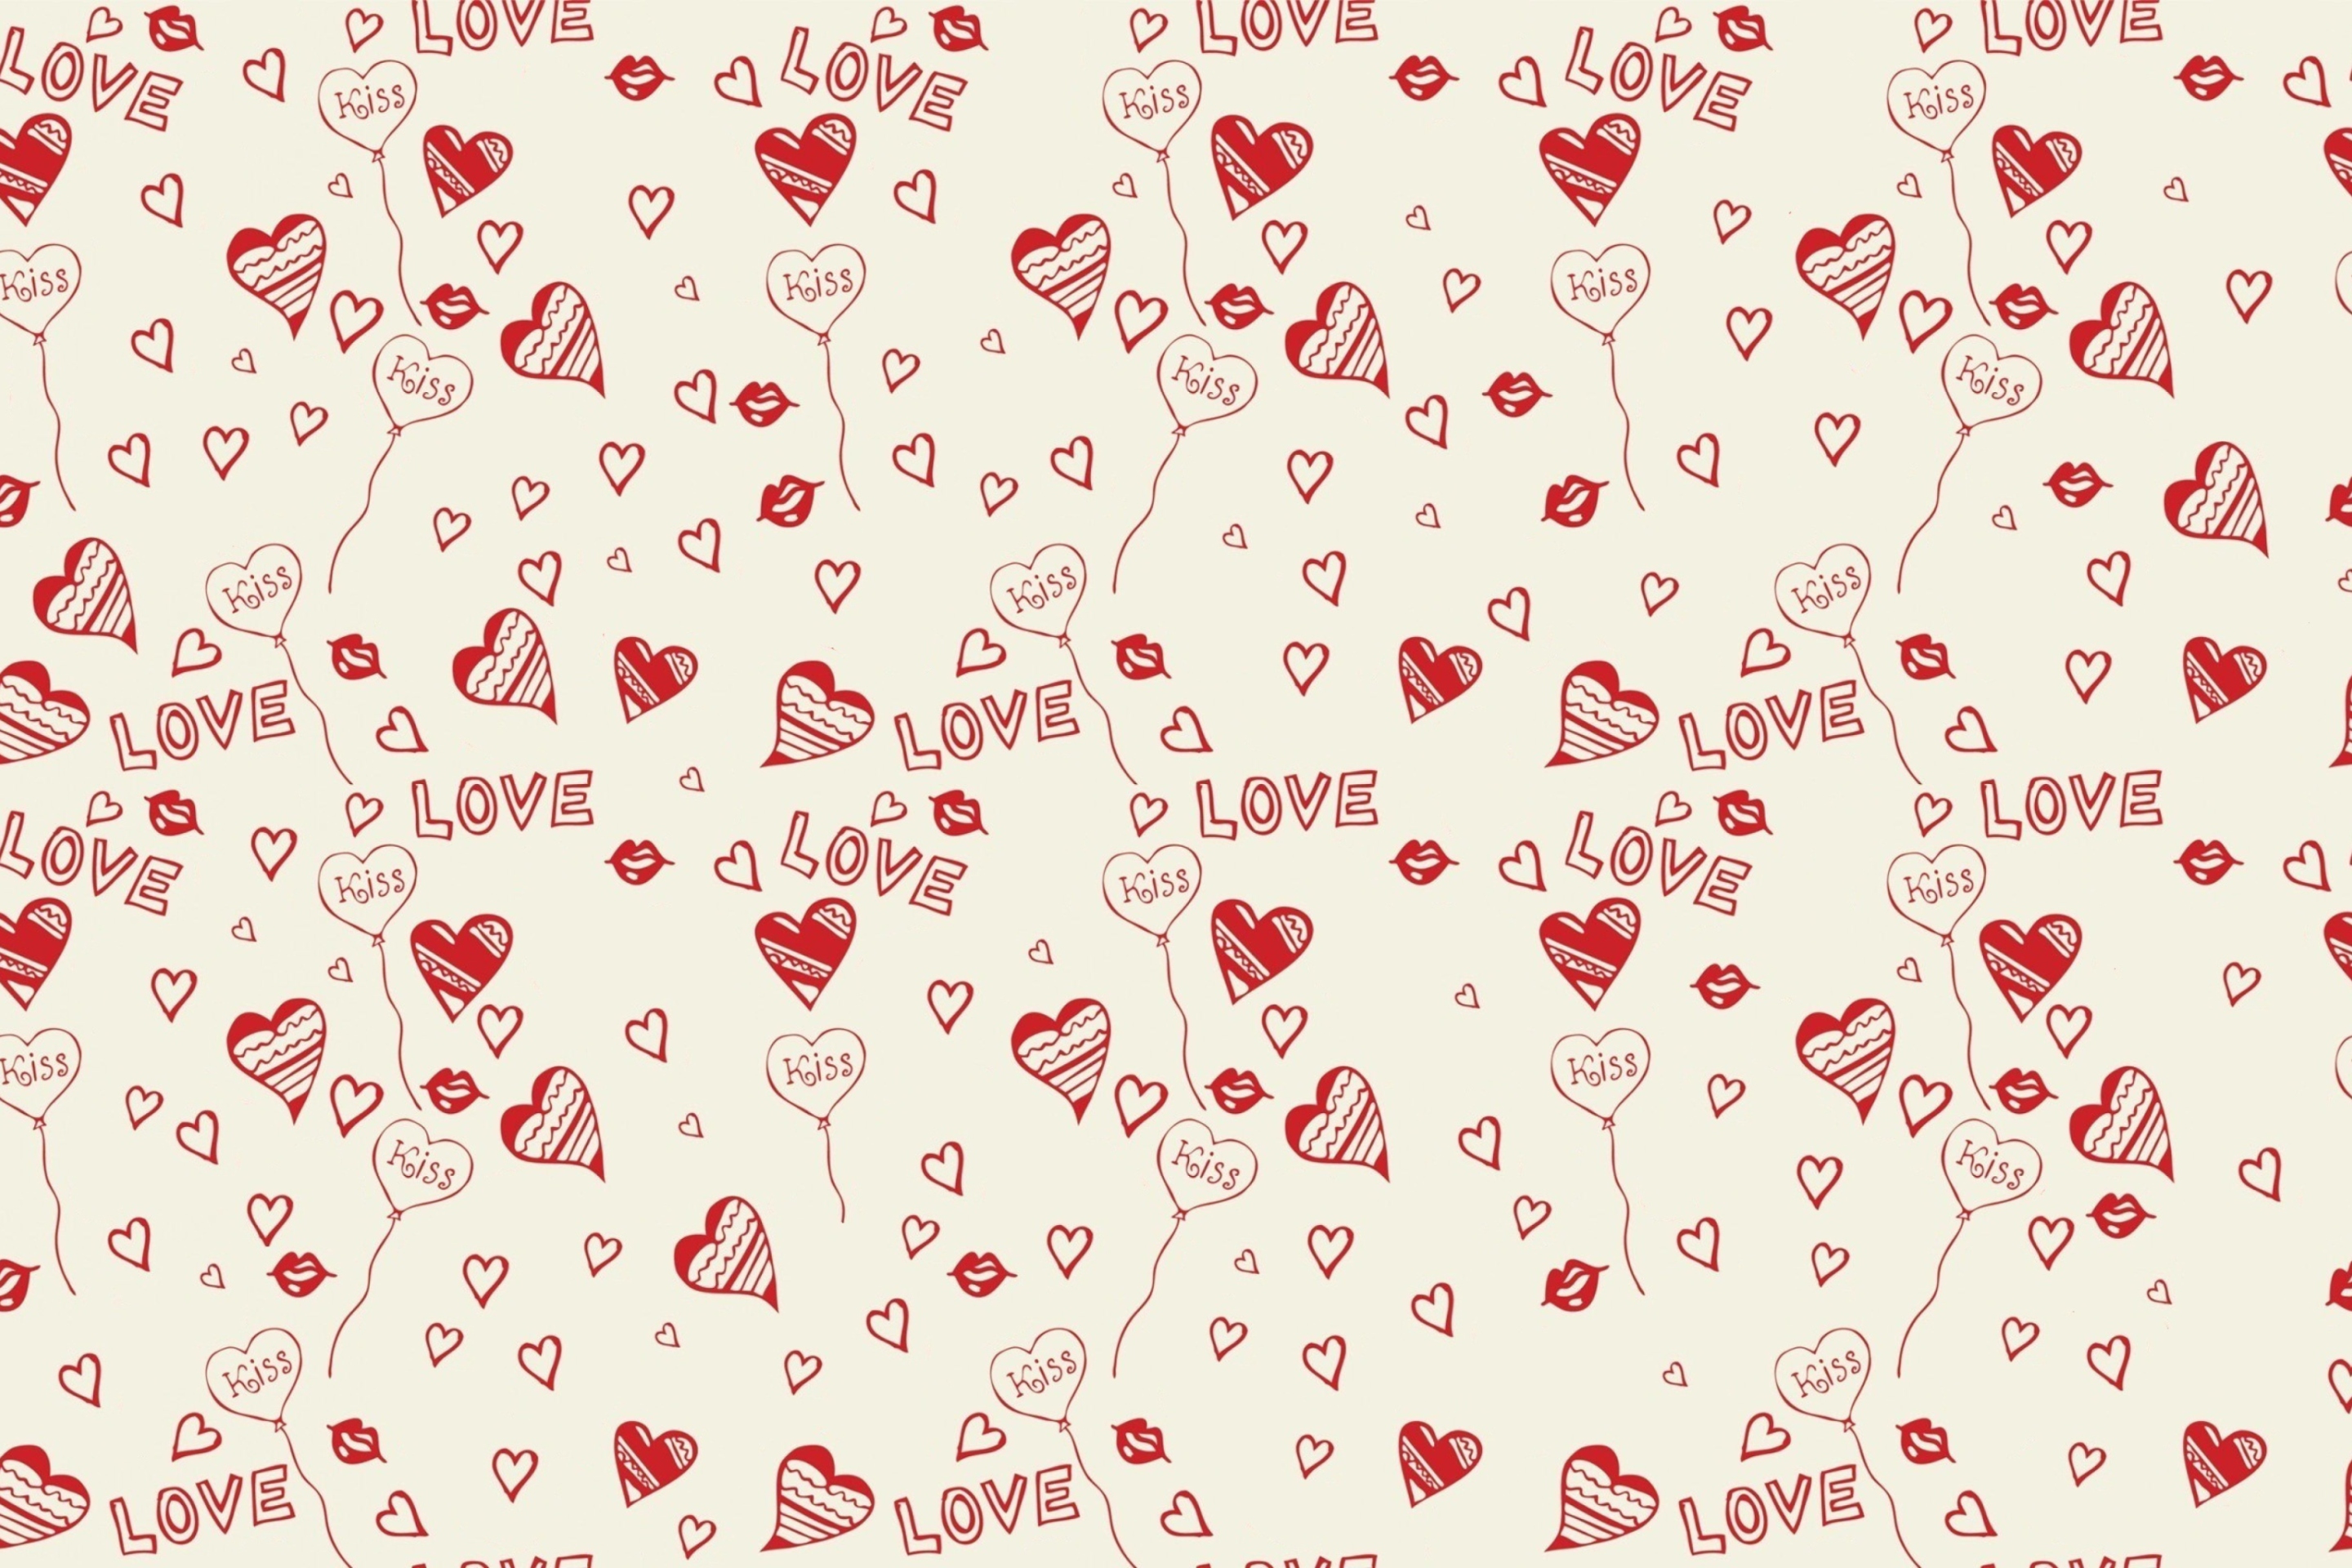 Love And Kiss wallpaper 2880x1920